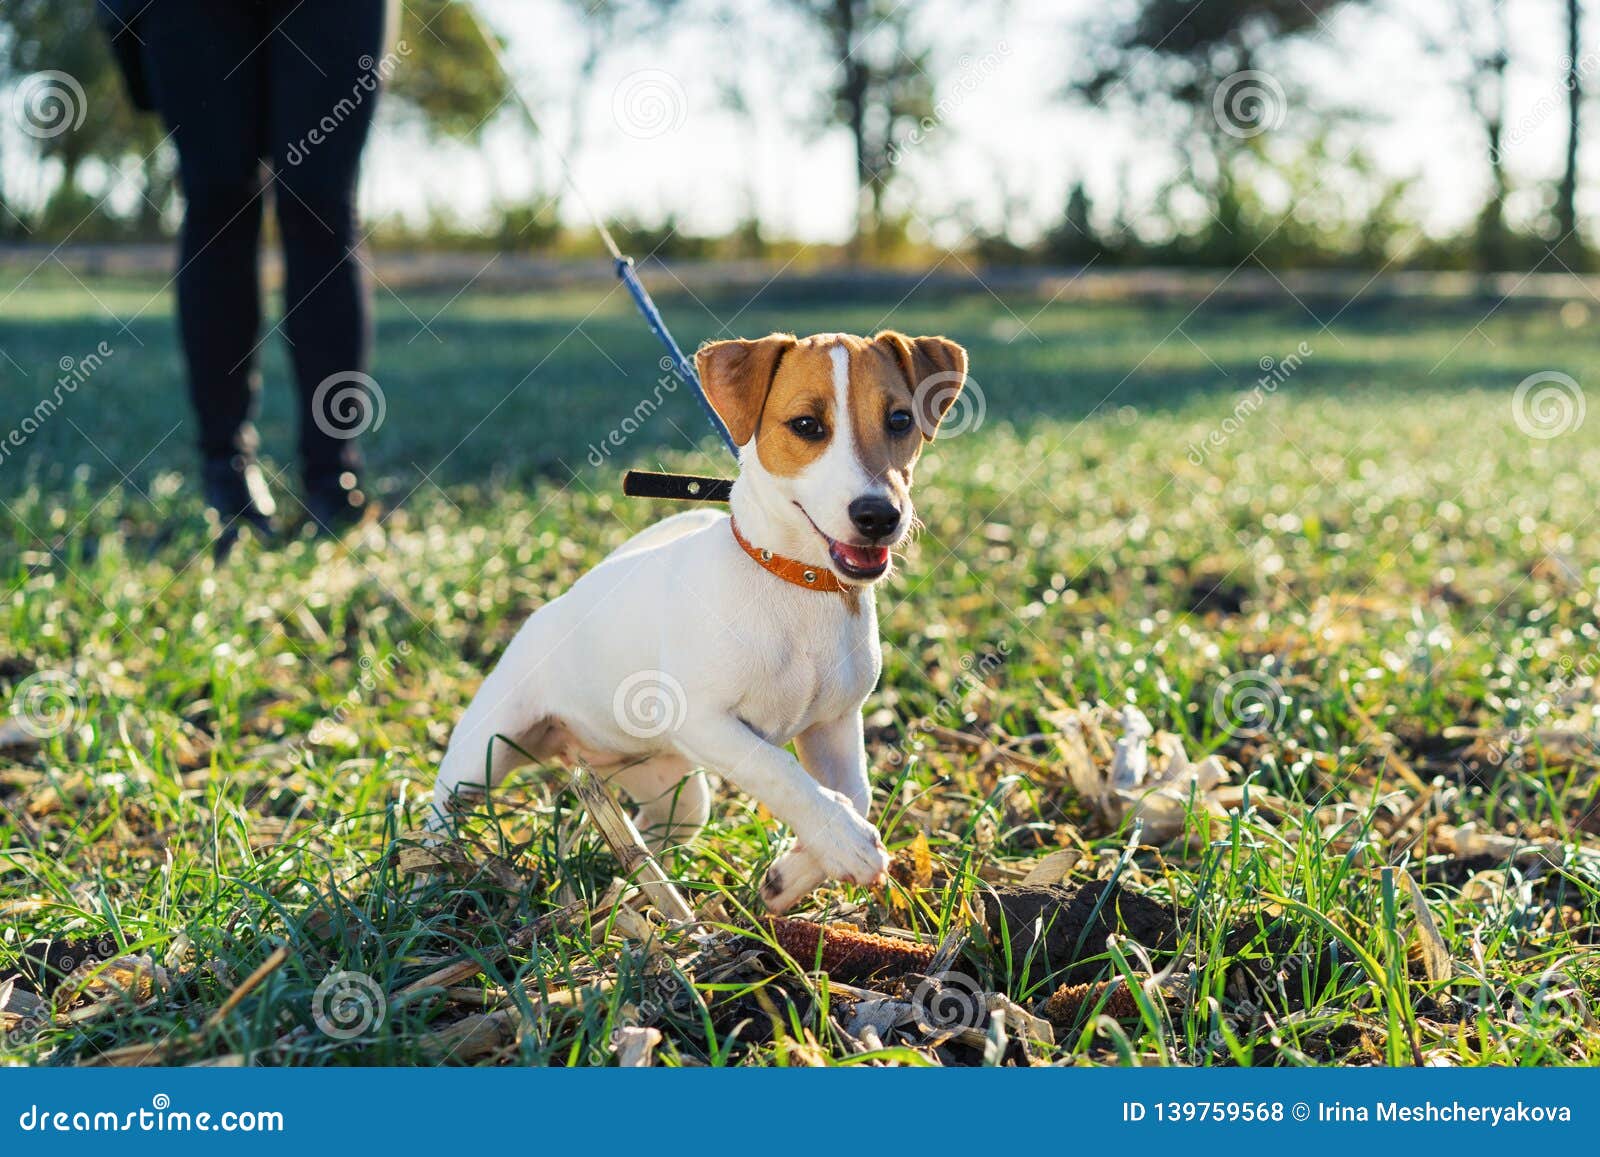 owner keeps the dog terrier jack russell on the collar rushing forward for a walk